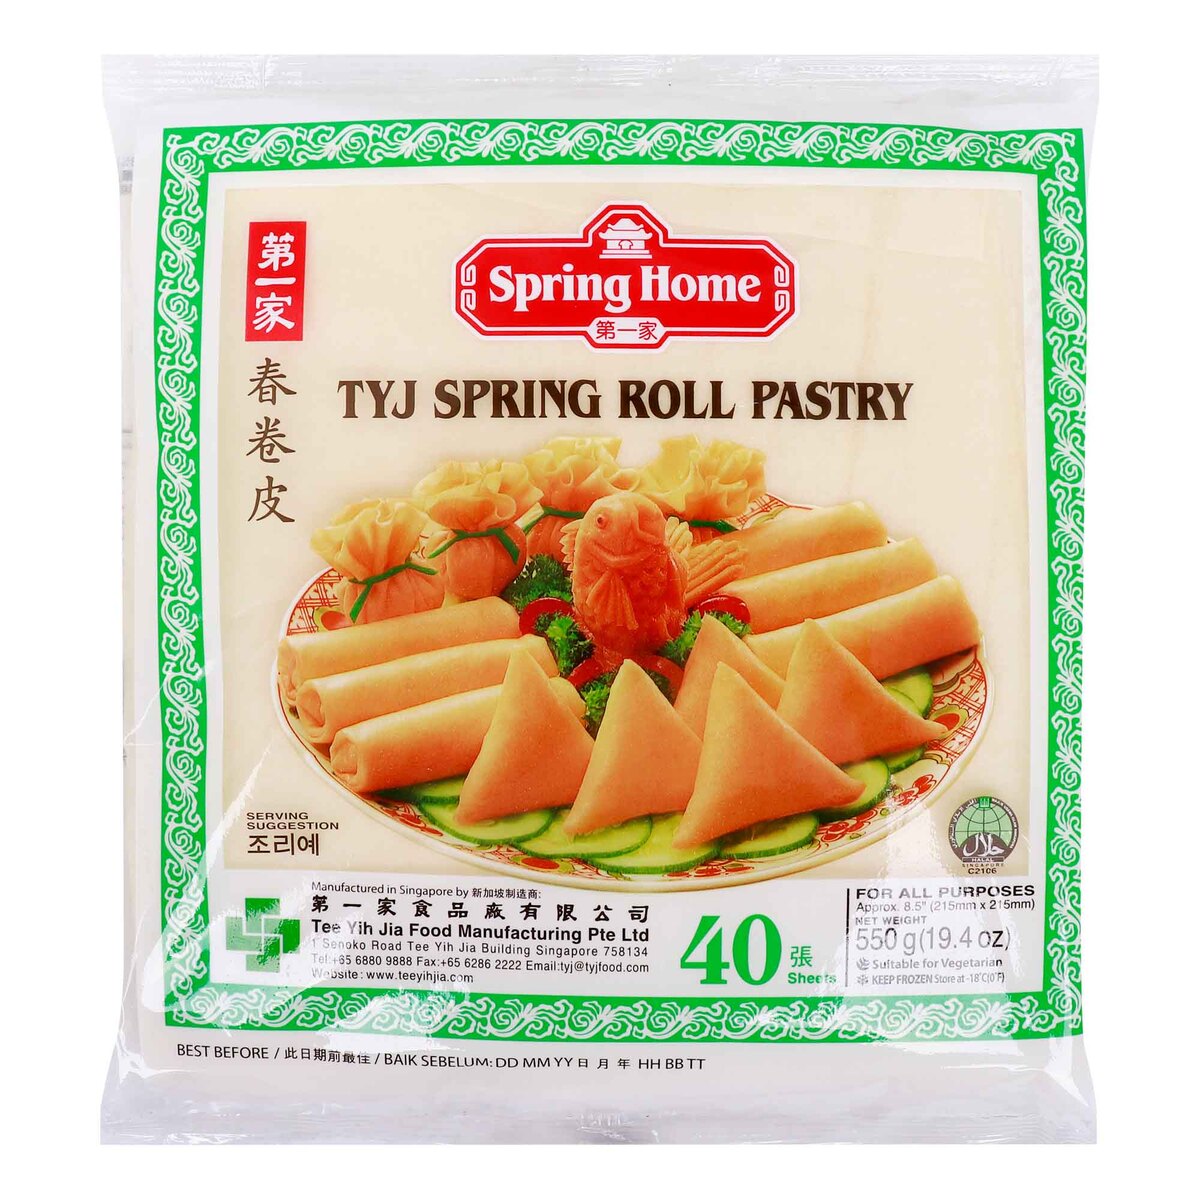 Spring Home TYJ Spring Roll Pastry 40 Sheets 550 g